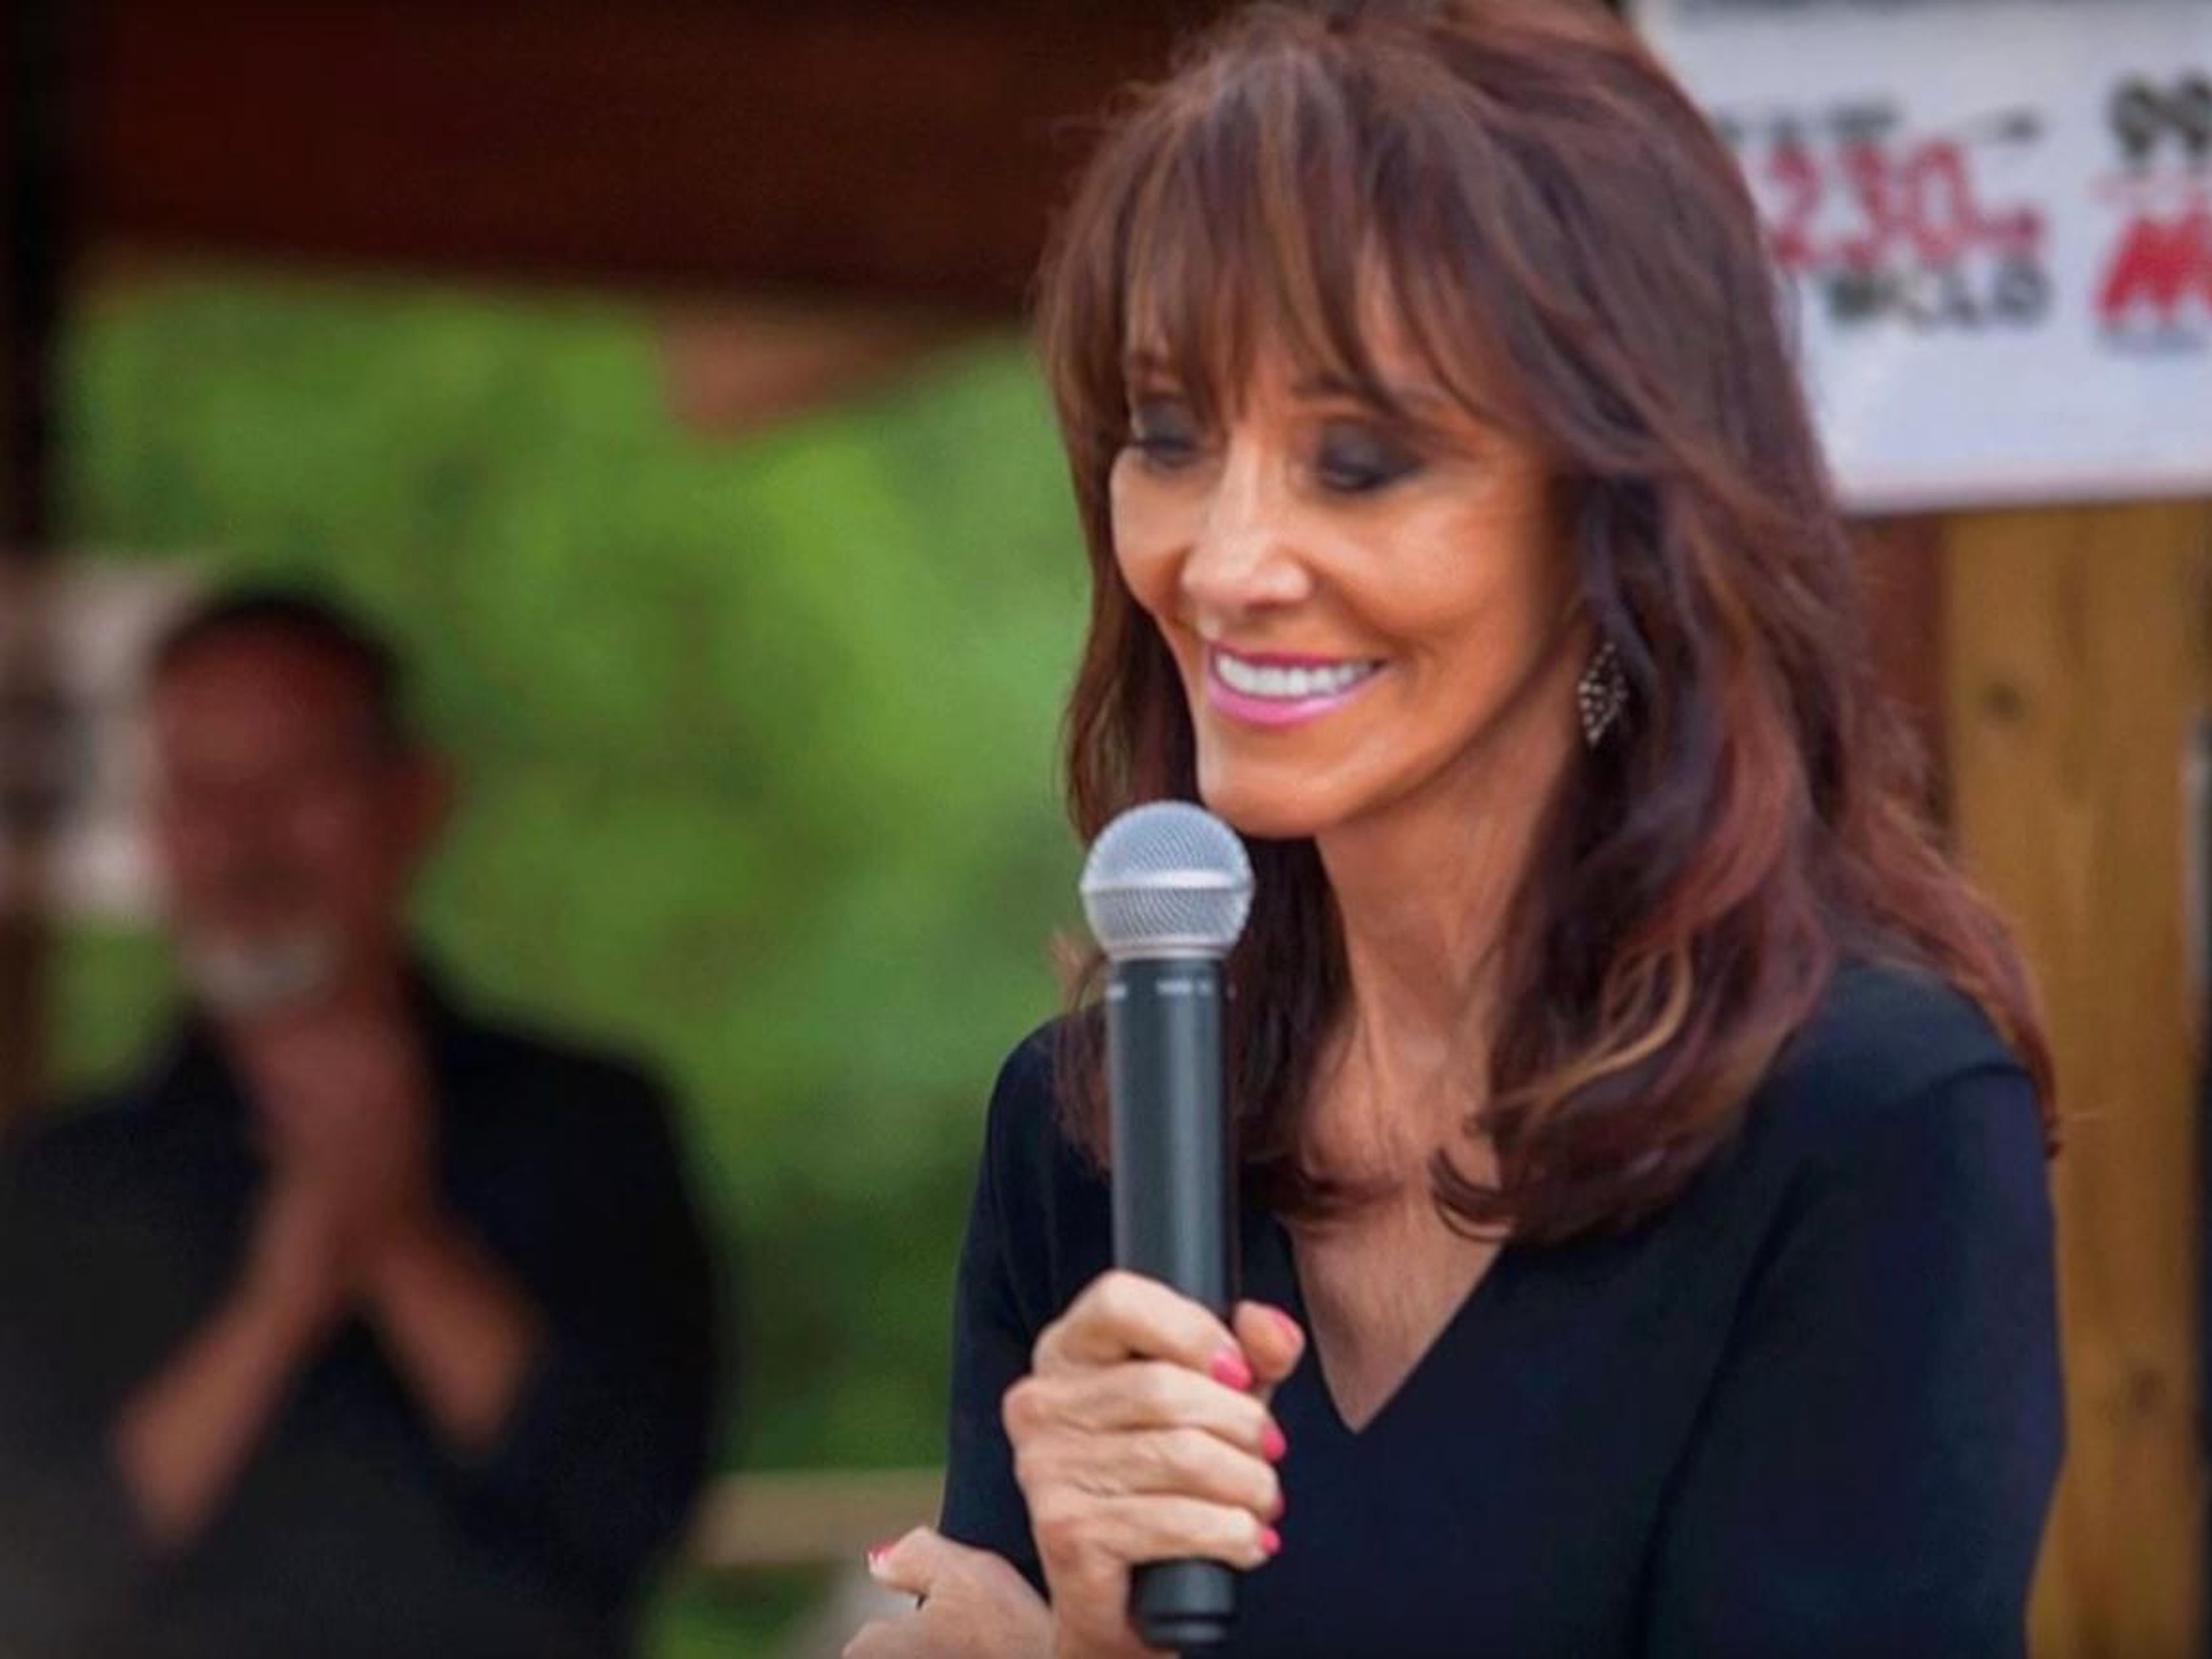 Wu is more than $3 billion richer than the richest self-made woman in the US, Diane Hendricks, who's worth about $6.3 billion. Hendricks is the chair, sole owner, and cofounder of ABC Supply, the largest wholesale distributor of